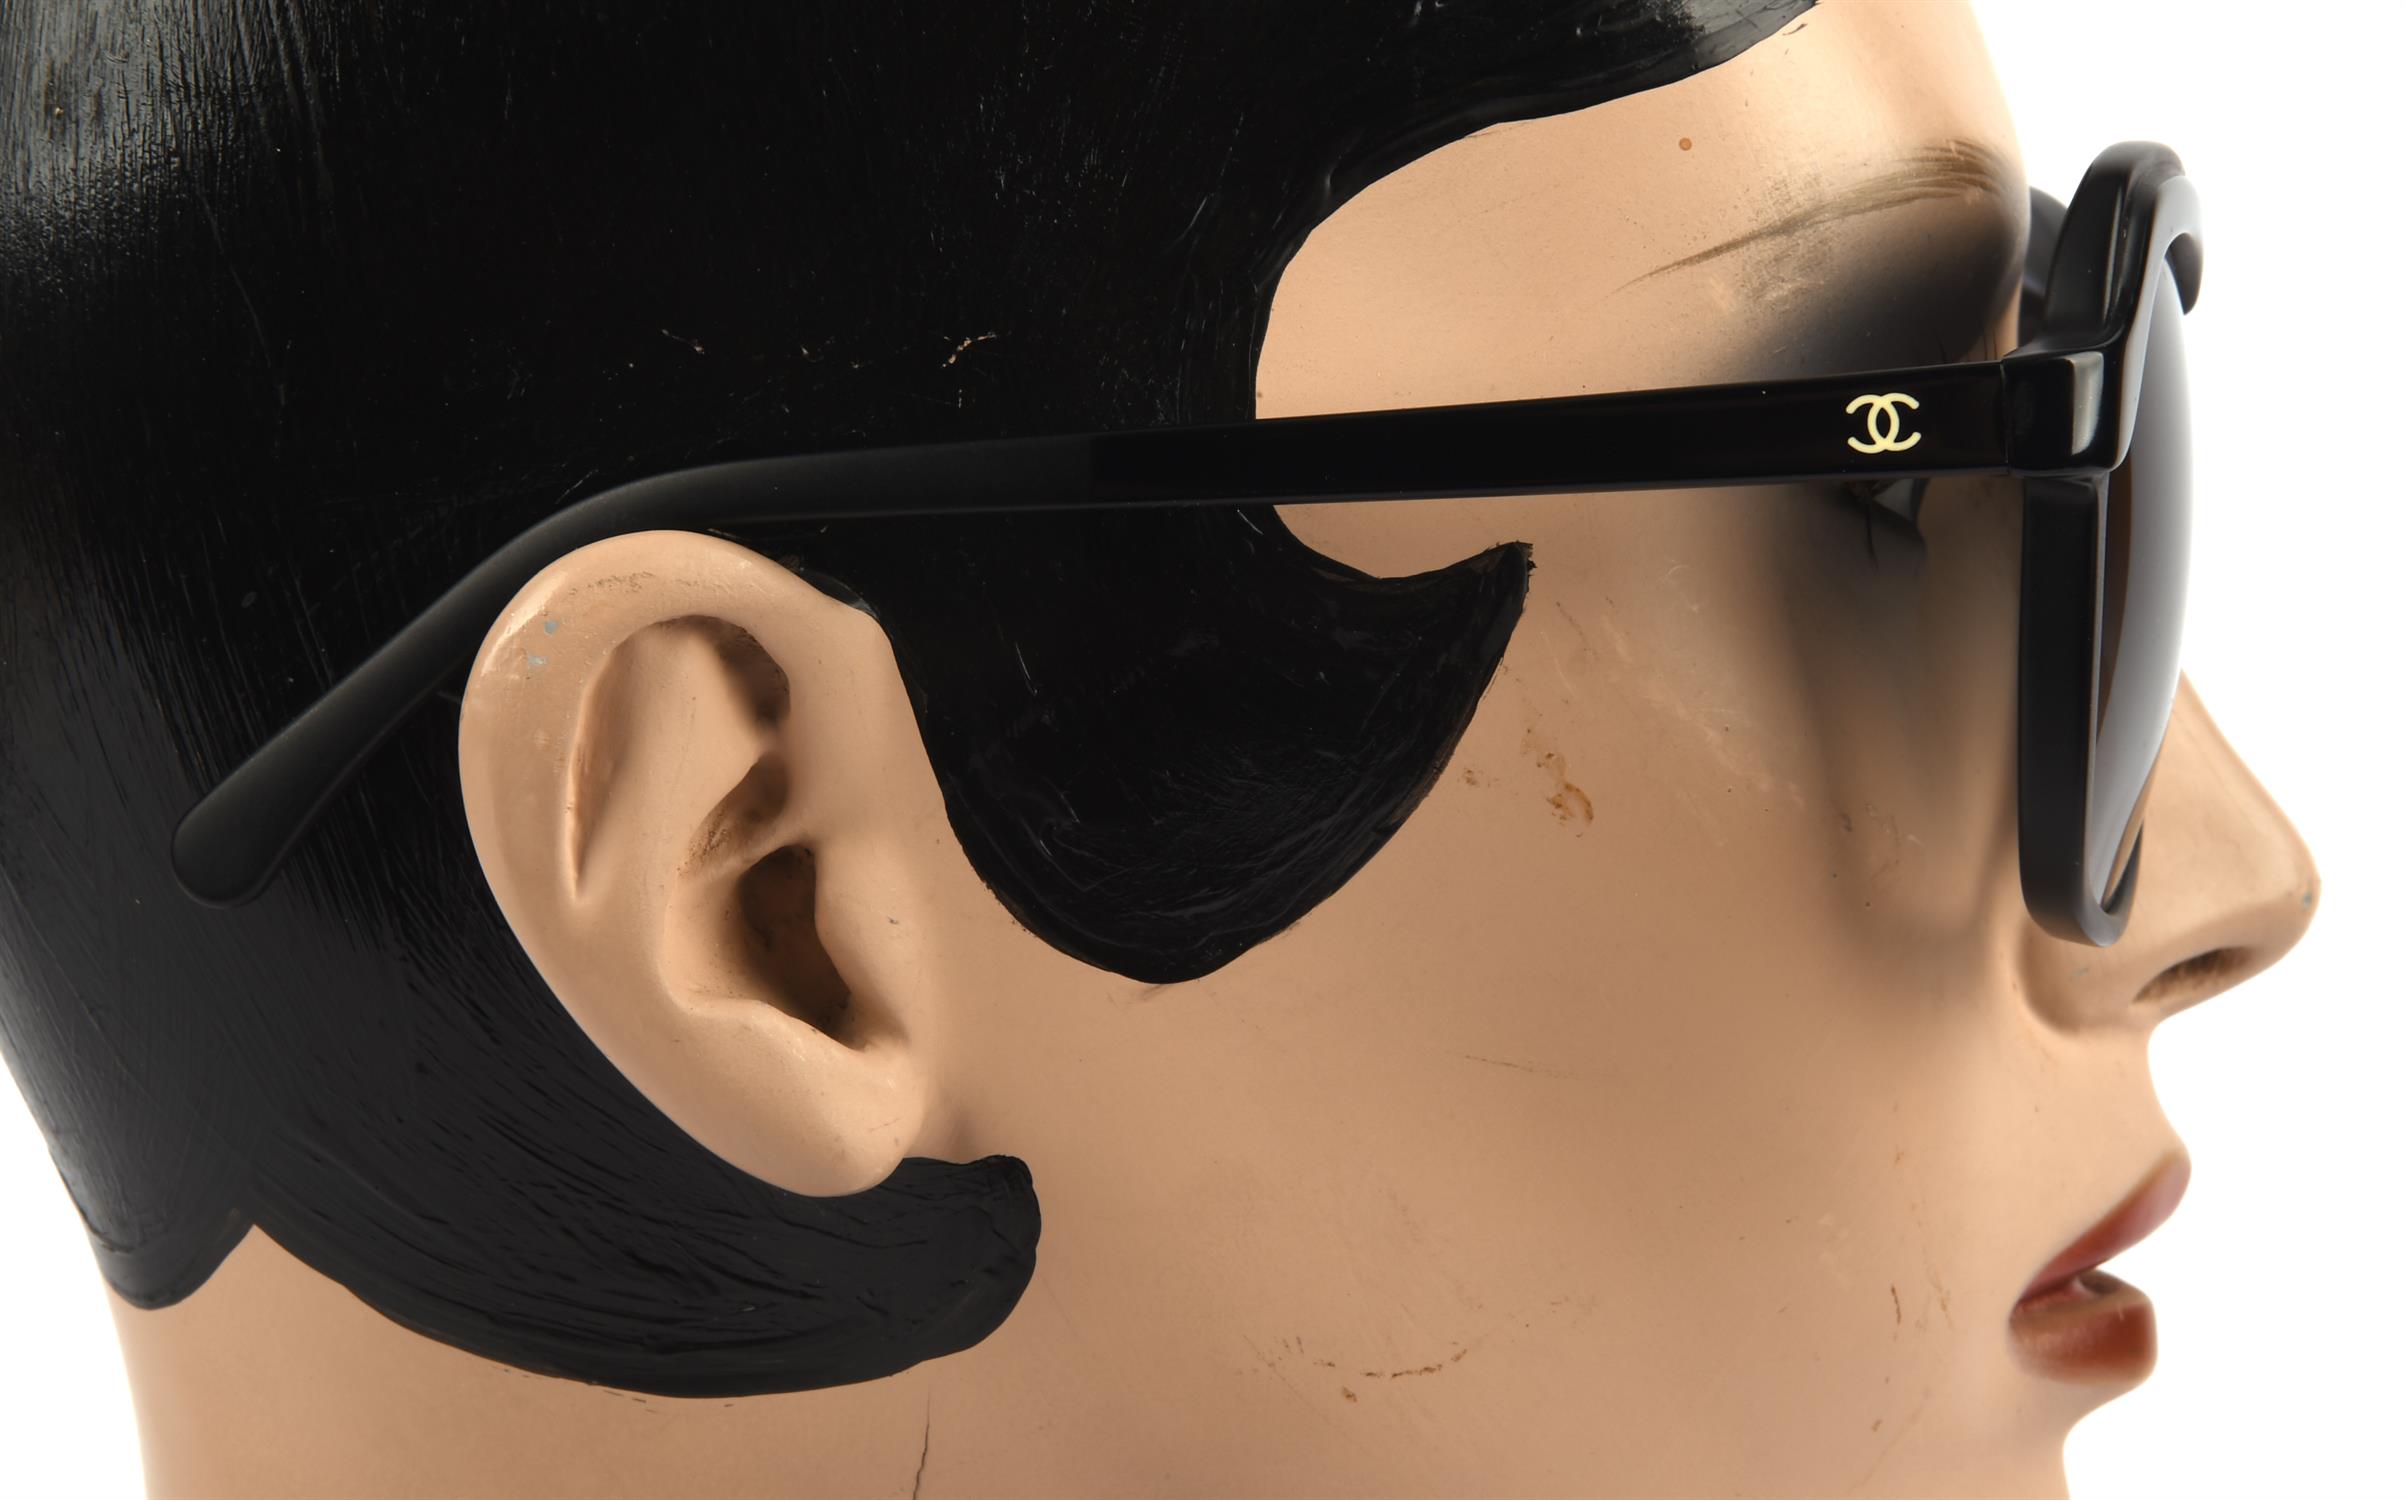 CHANEL a pair of ladies sunglasses in a black quilted case - Image 3 of 4